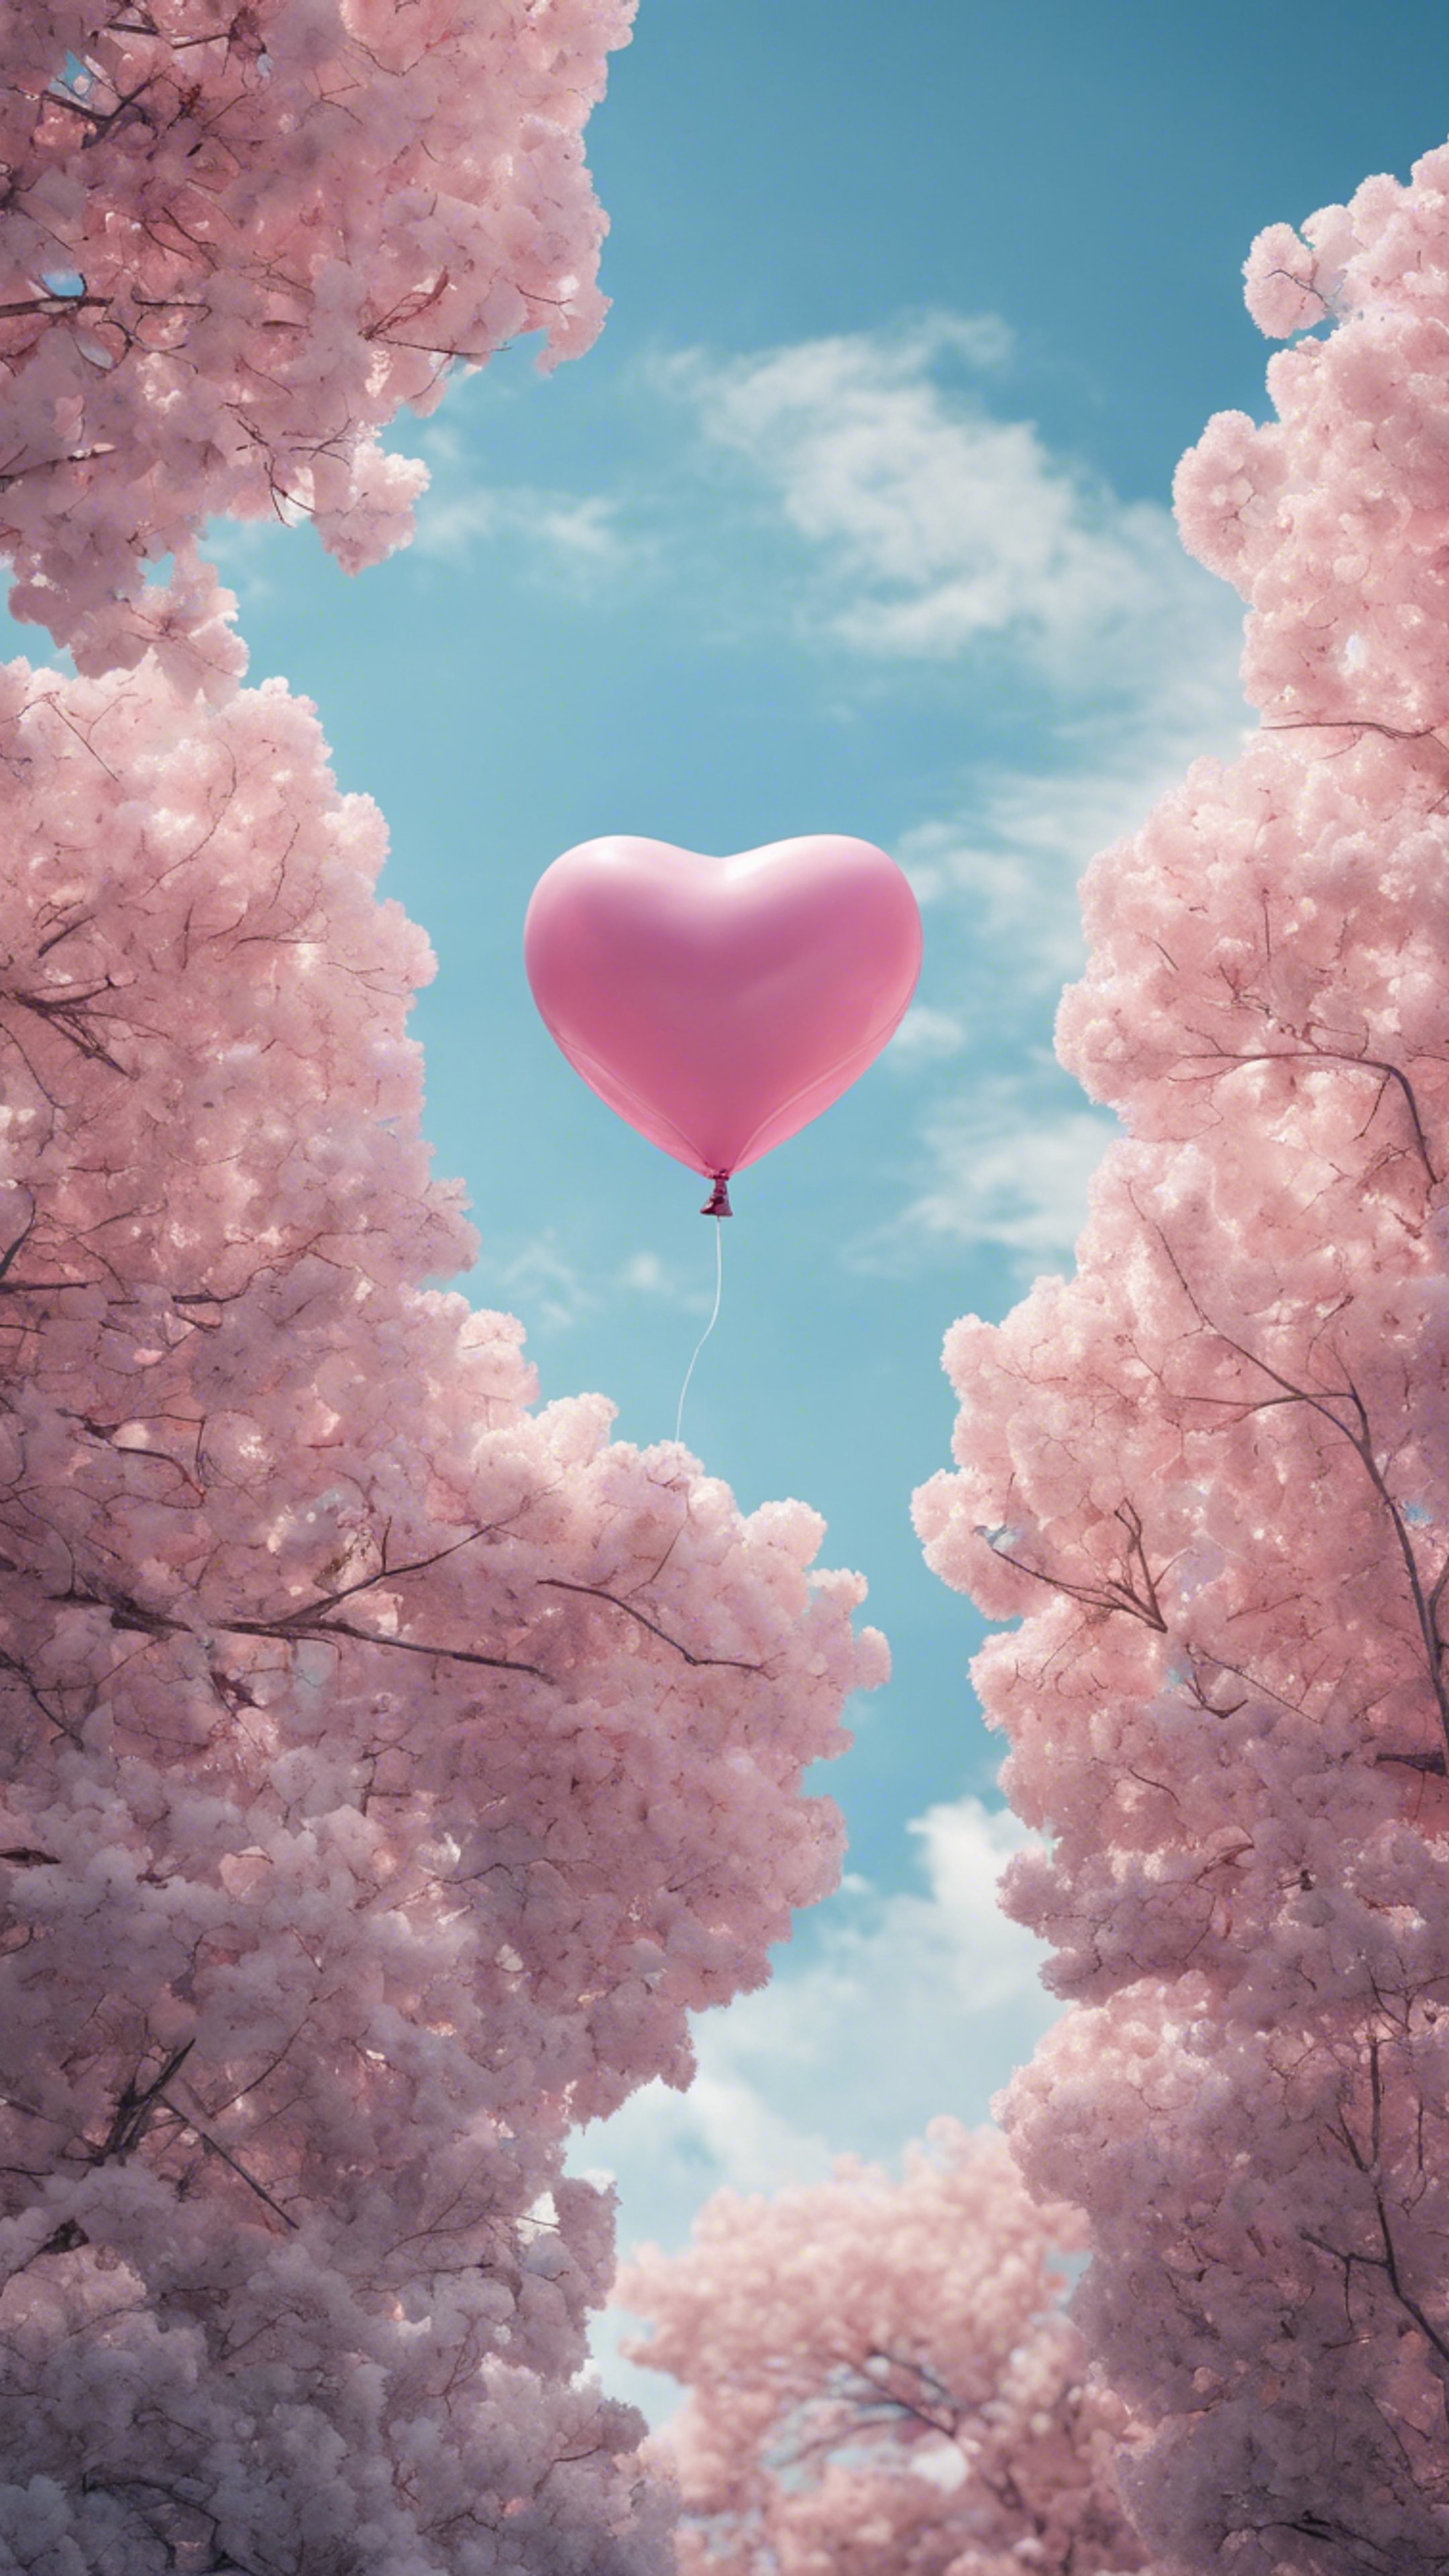 A pink heart-shaped balloon floating in the blue sky.壁紙[cd7c71404dc64bc7bb7c]